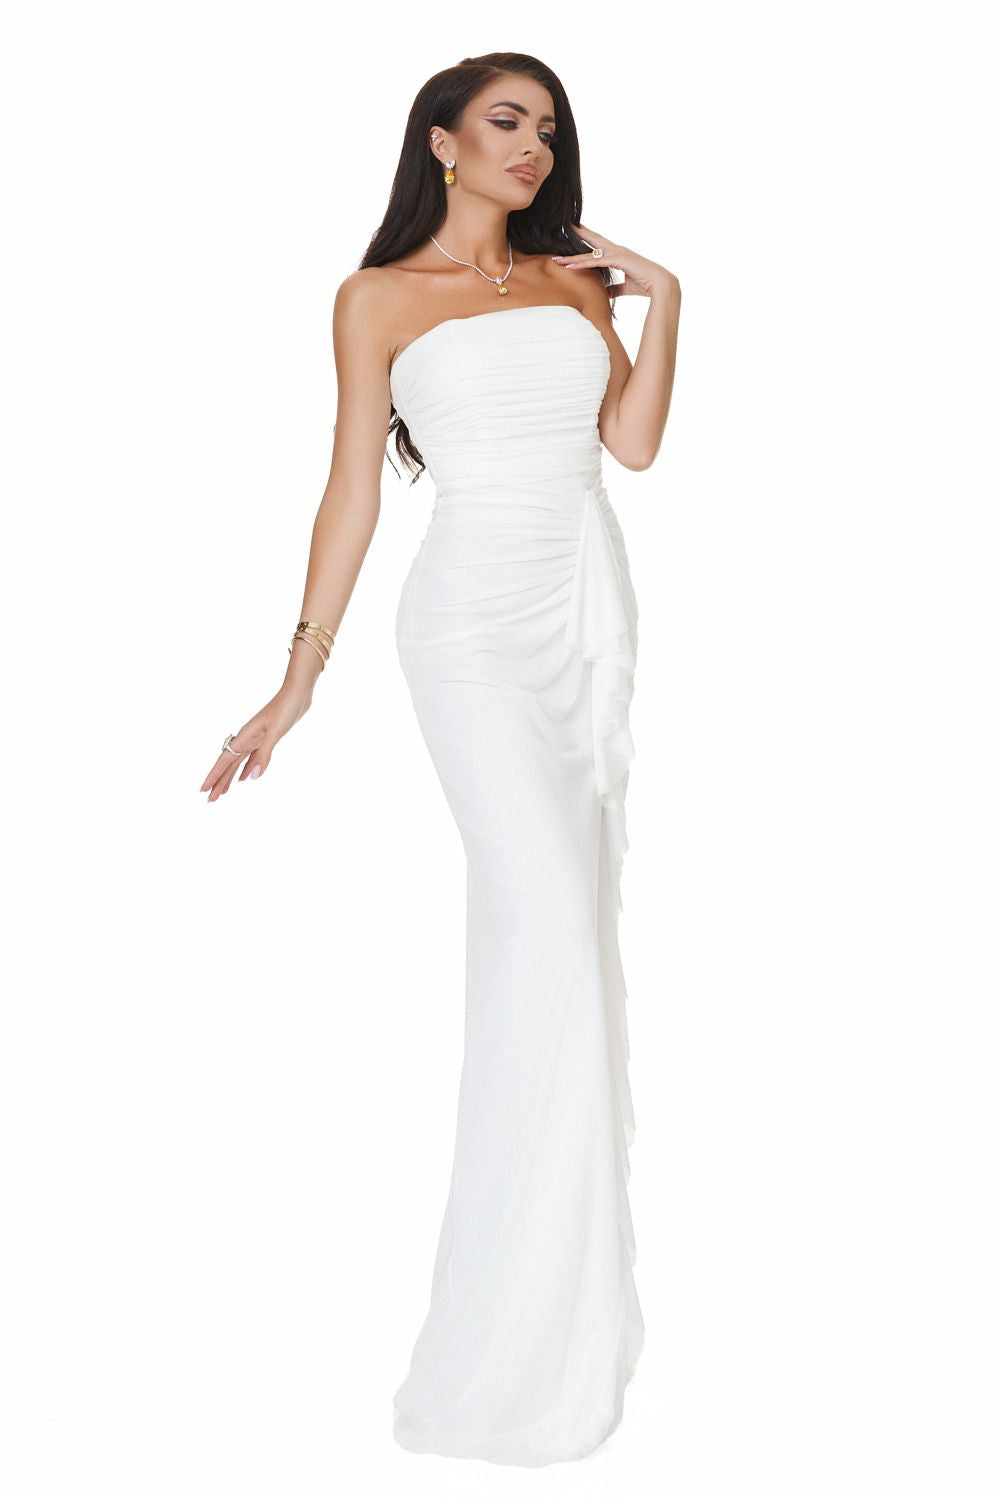 Petynina Bogas long white dress for ladies